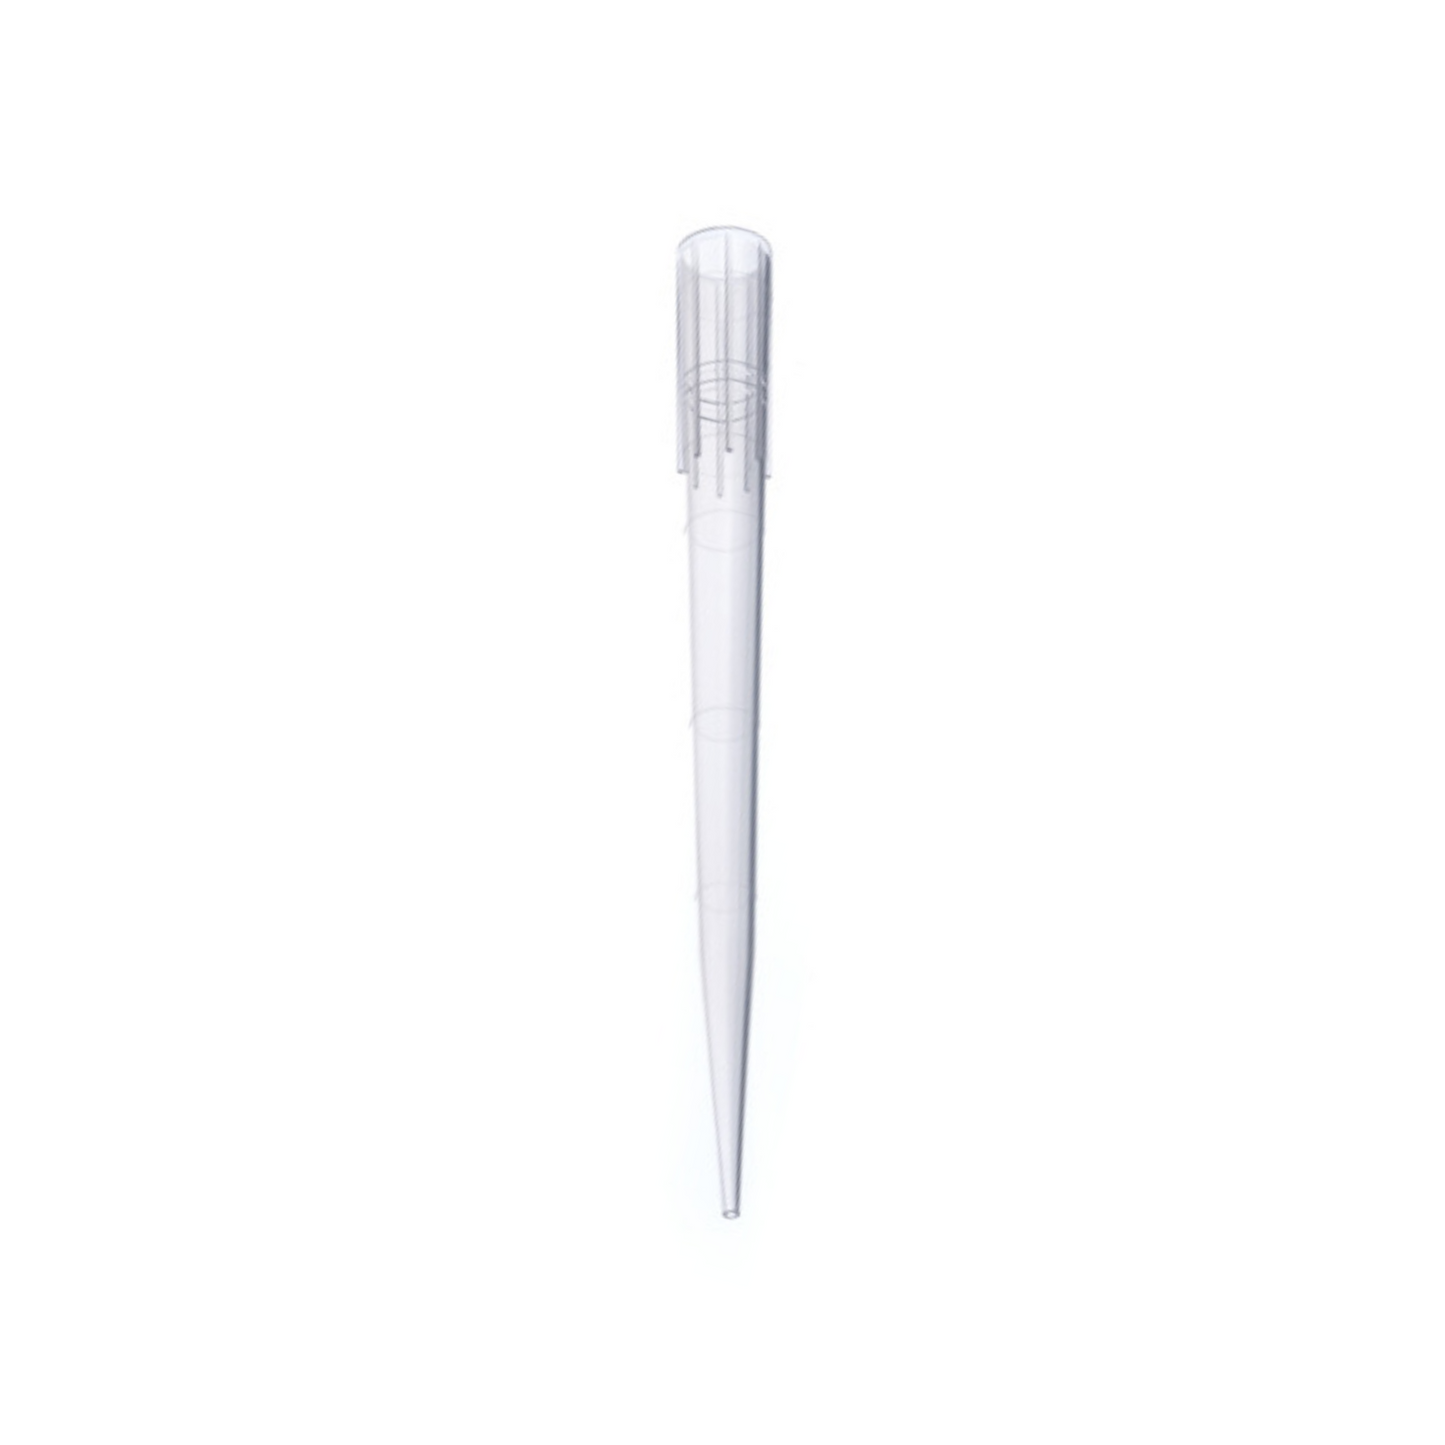 Greiner 1250μL Bio-One Sapphire Low Retention Pipette Tip, Overpack of 5 cases (778364)